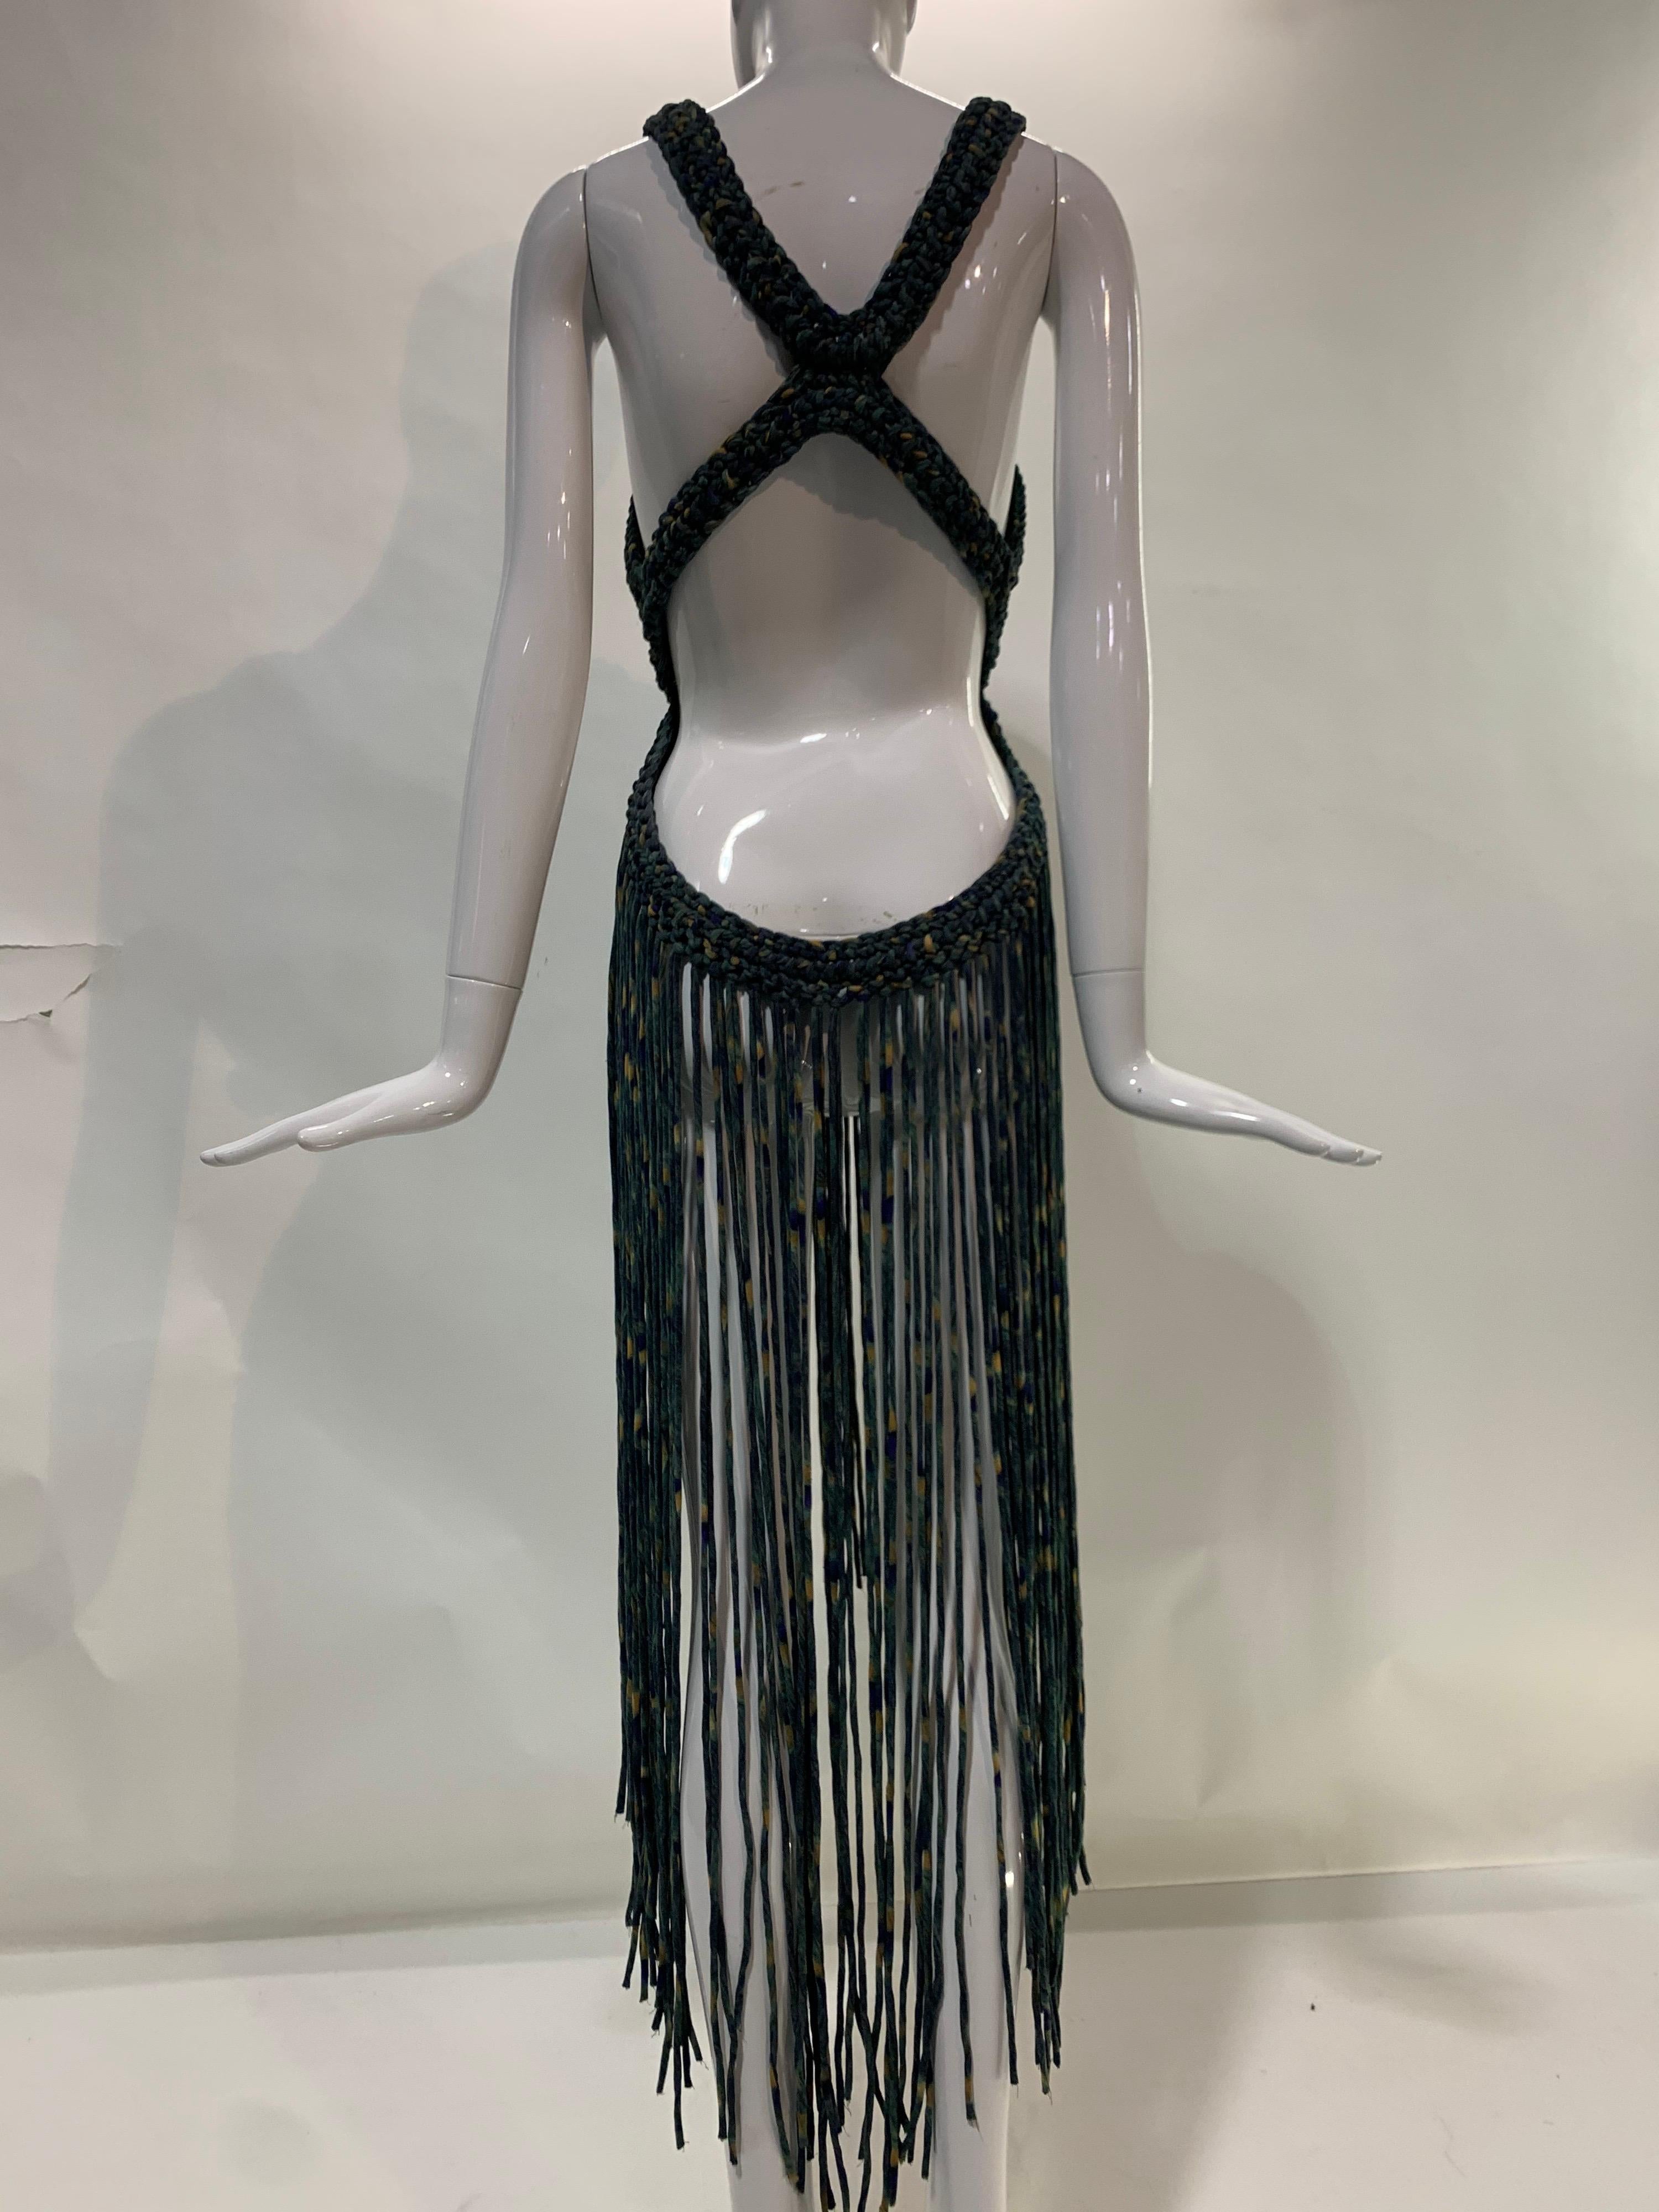 Torso Creations Hand-Macrame Halter Swimsuit Coverup w/ Heavy Fringe & Front Tie In New Condition For Sale In Gresham, OR